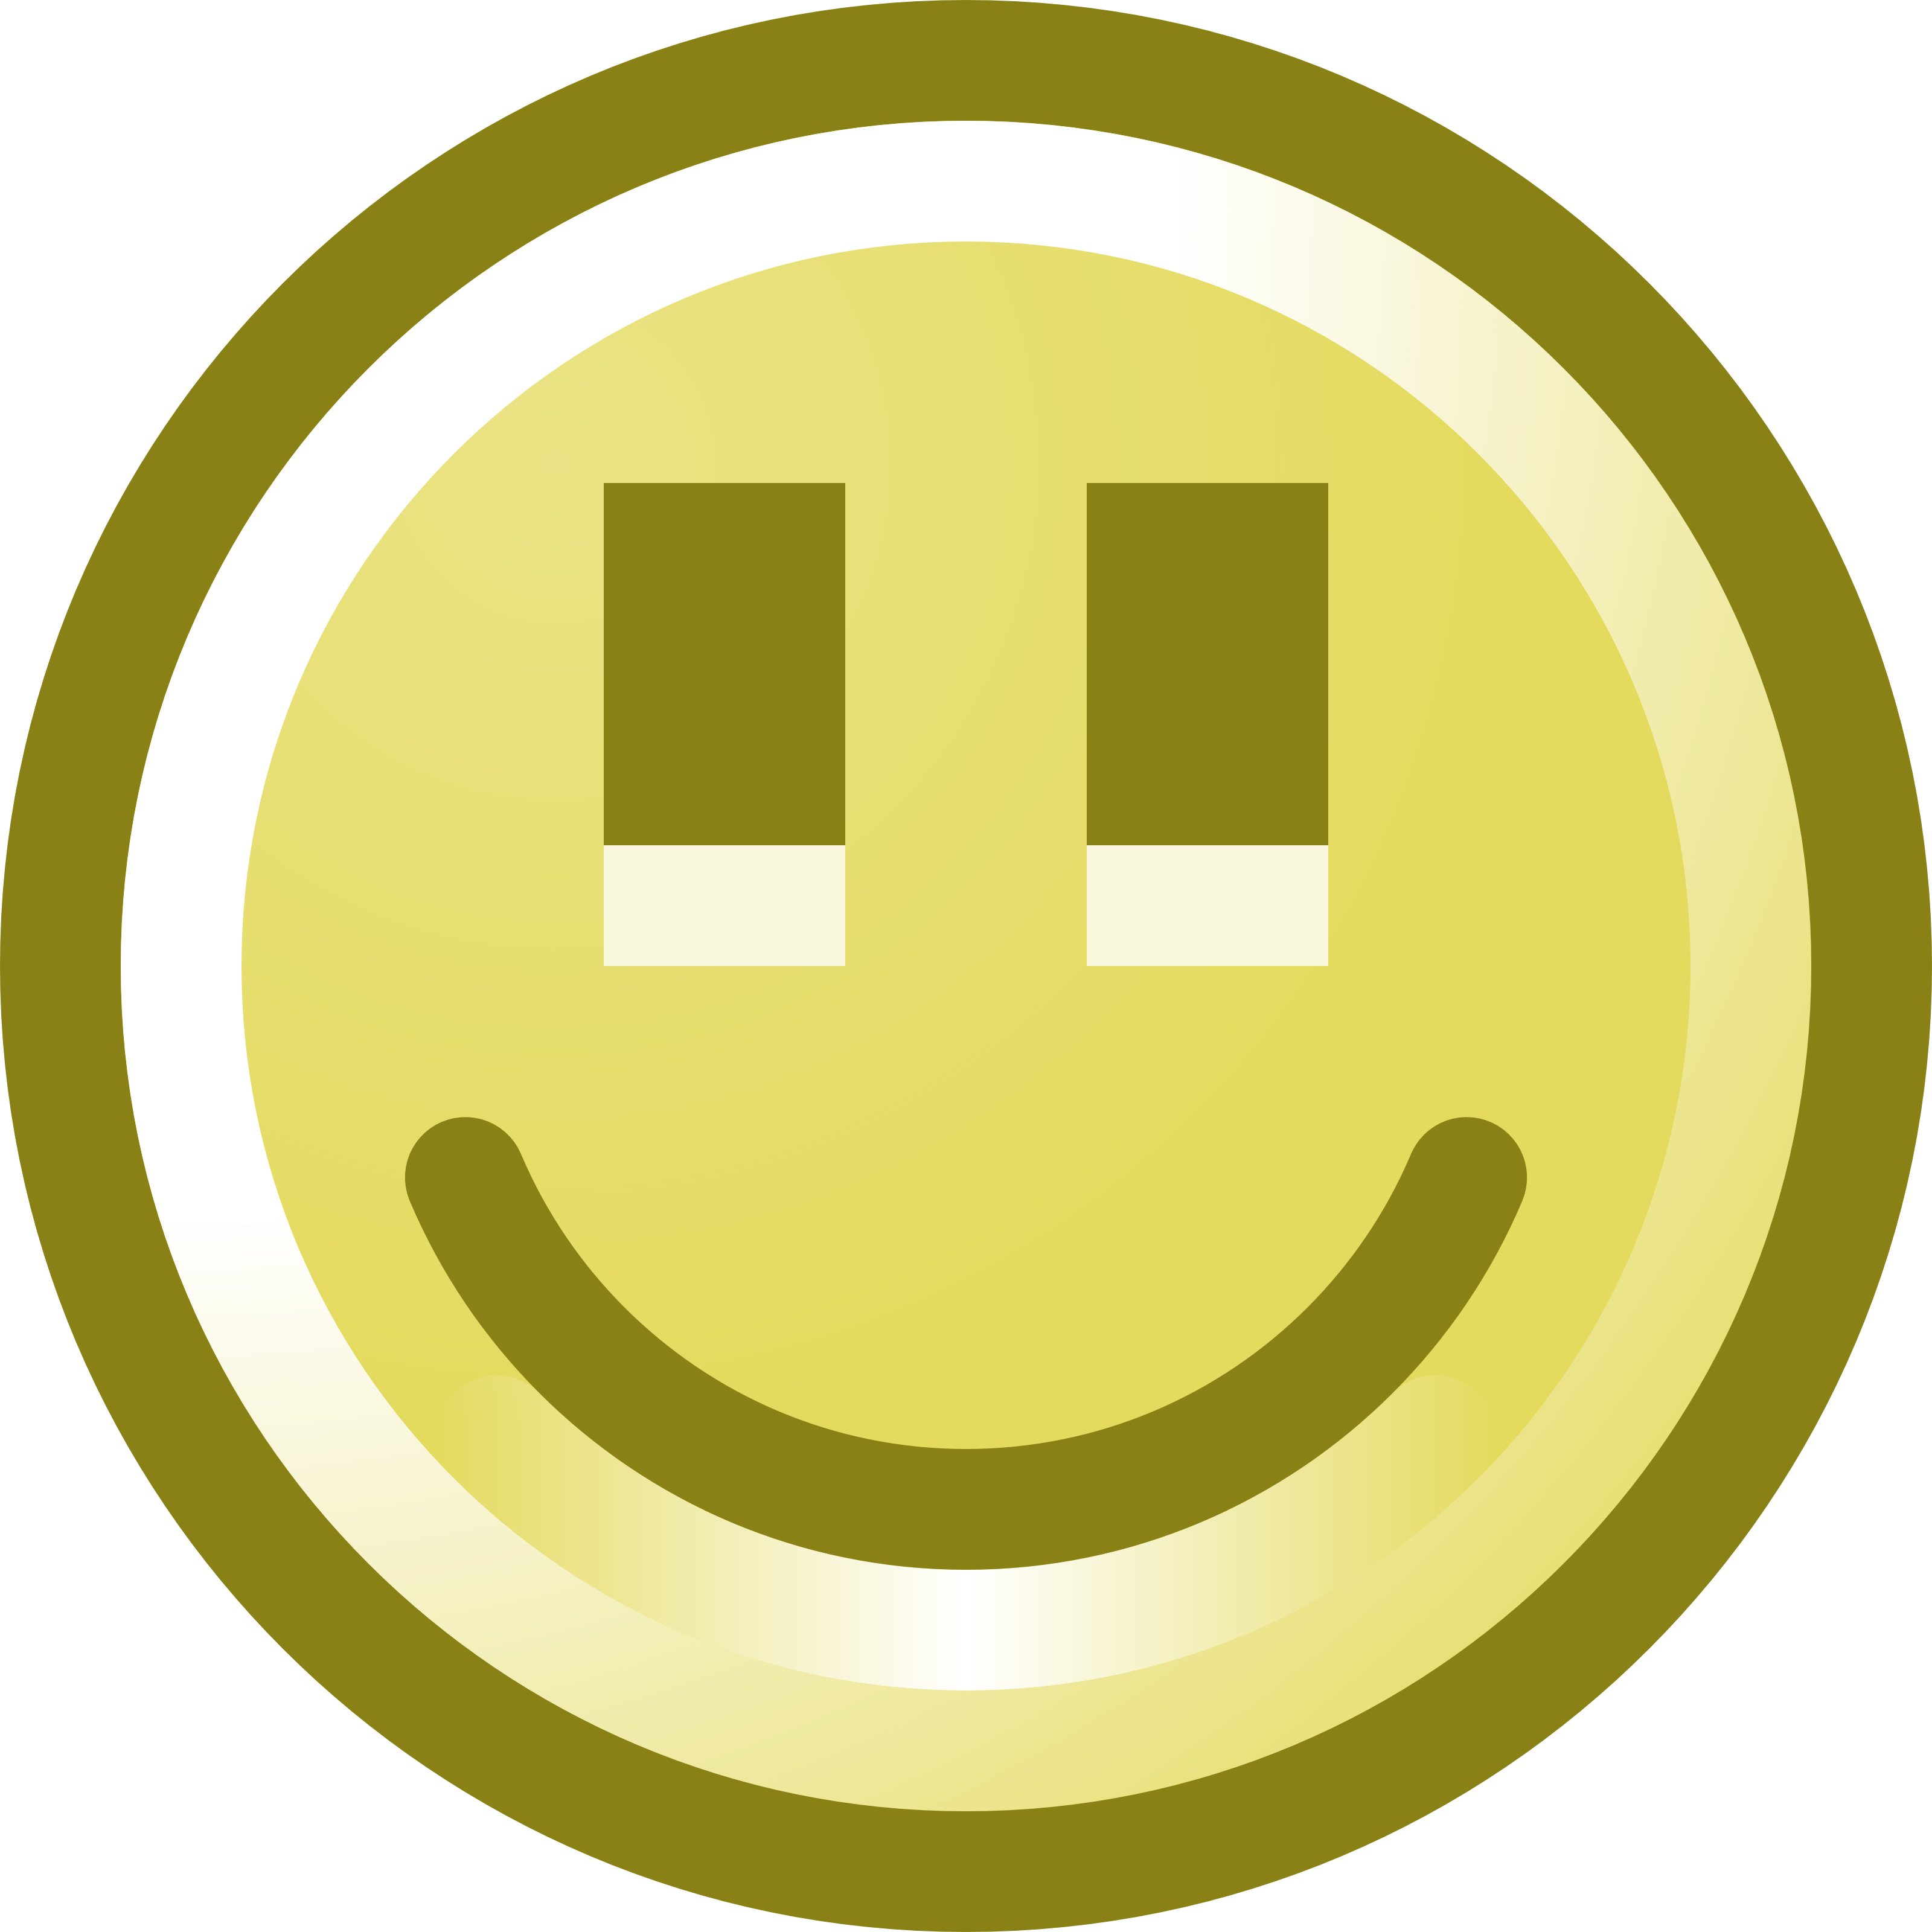 Smile smiling eyes clipart free clipart images